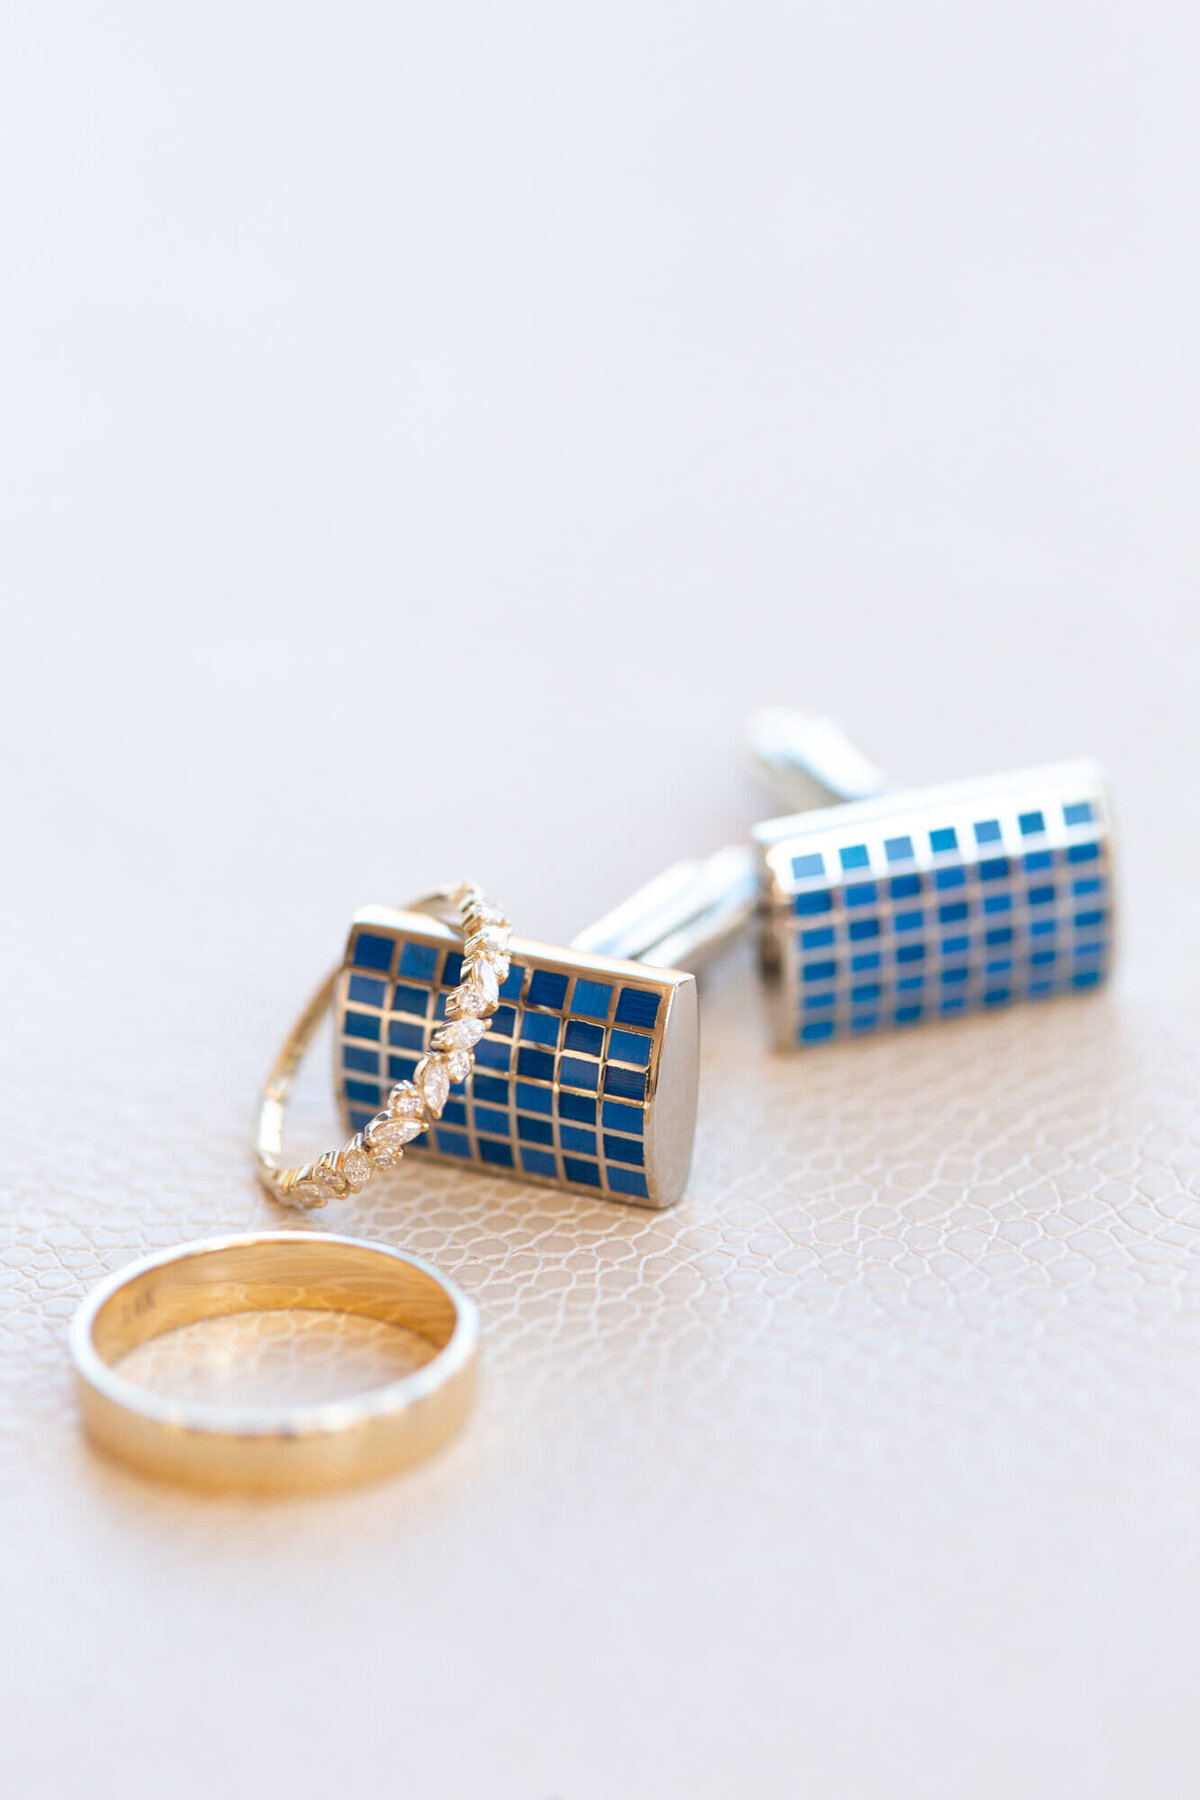 chicago-viceroy-rings-cufflinks-blue-mosaic